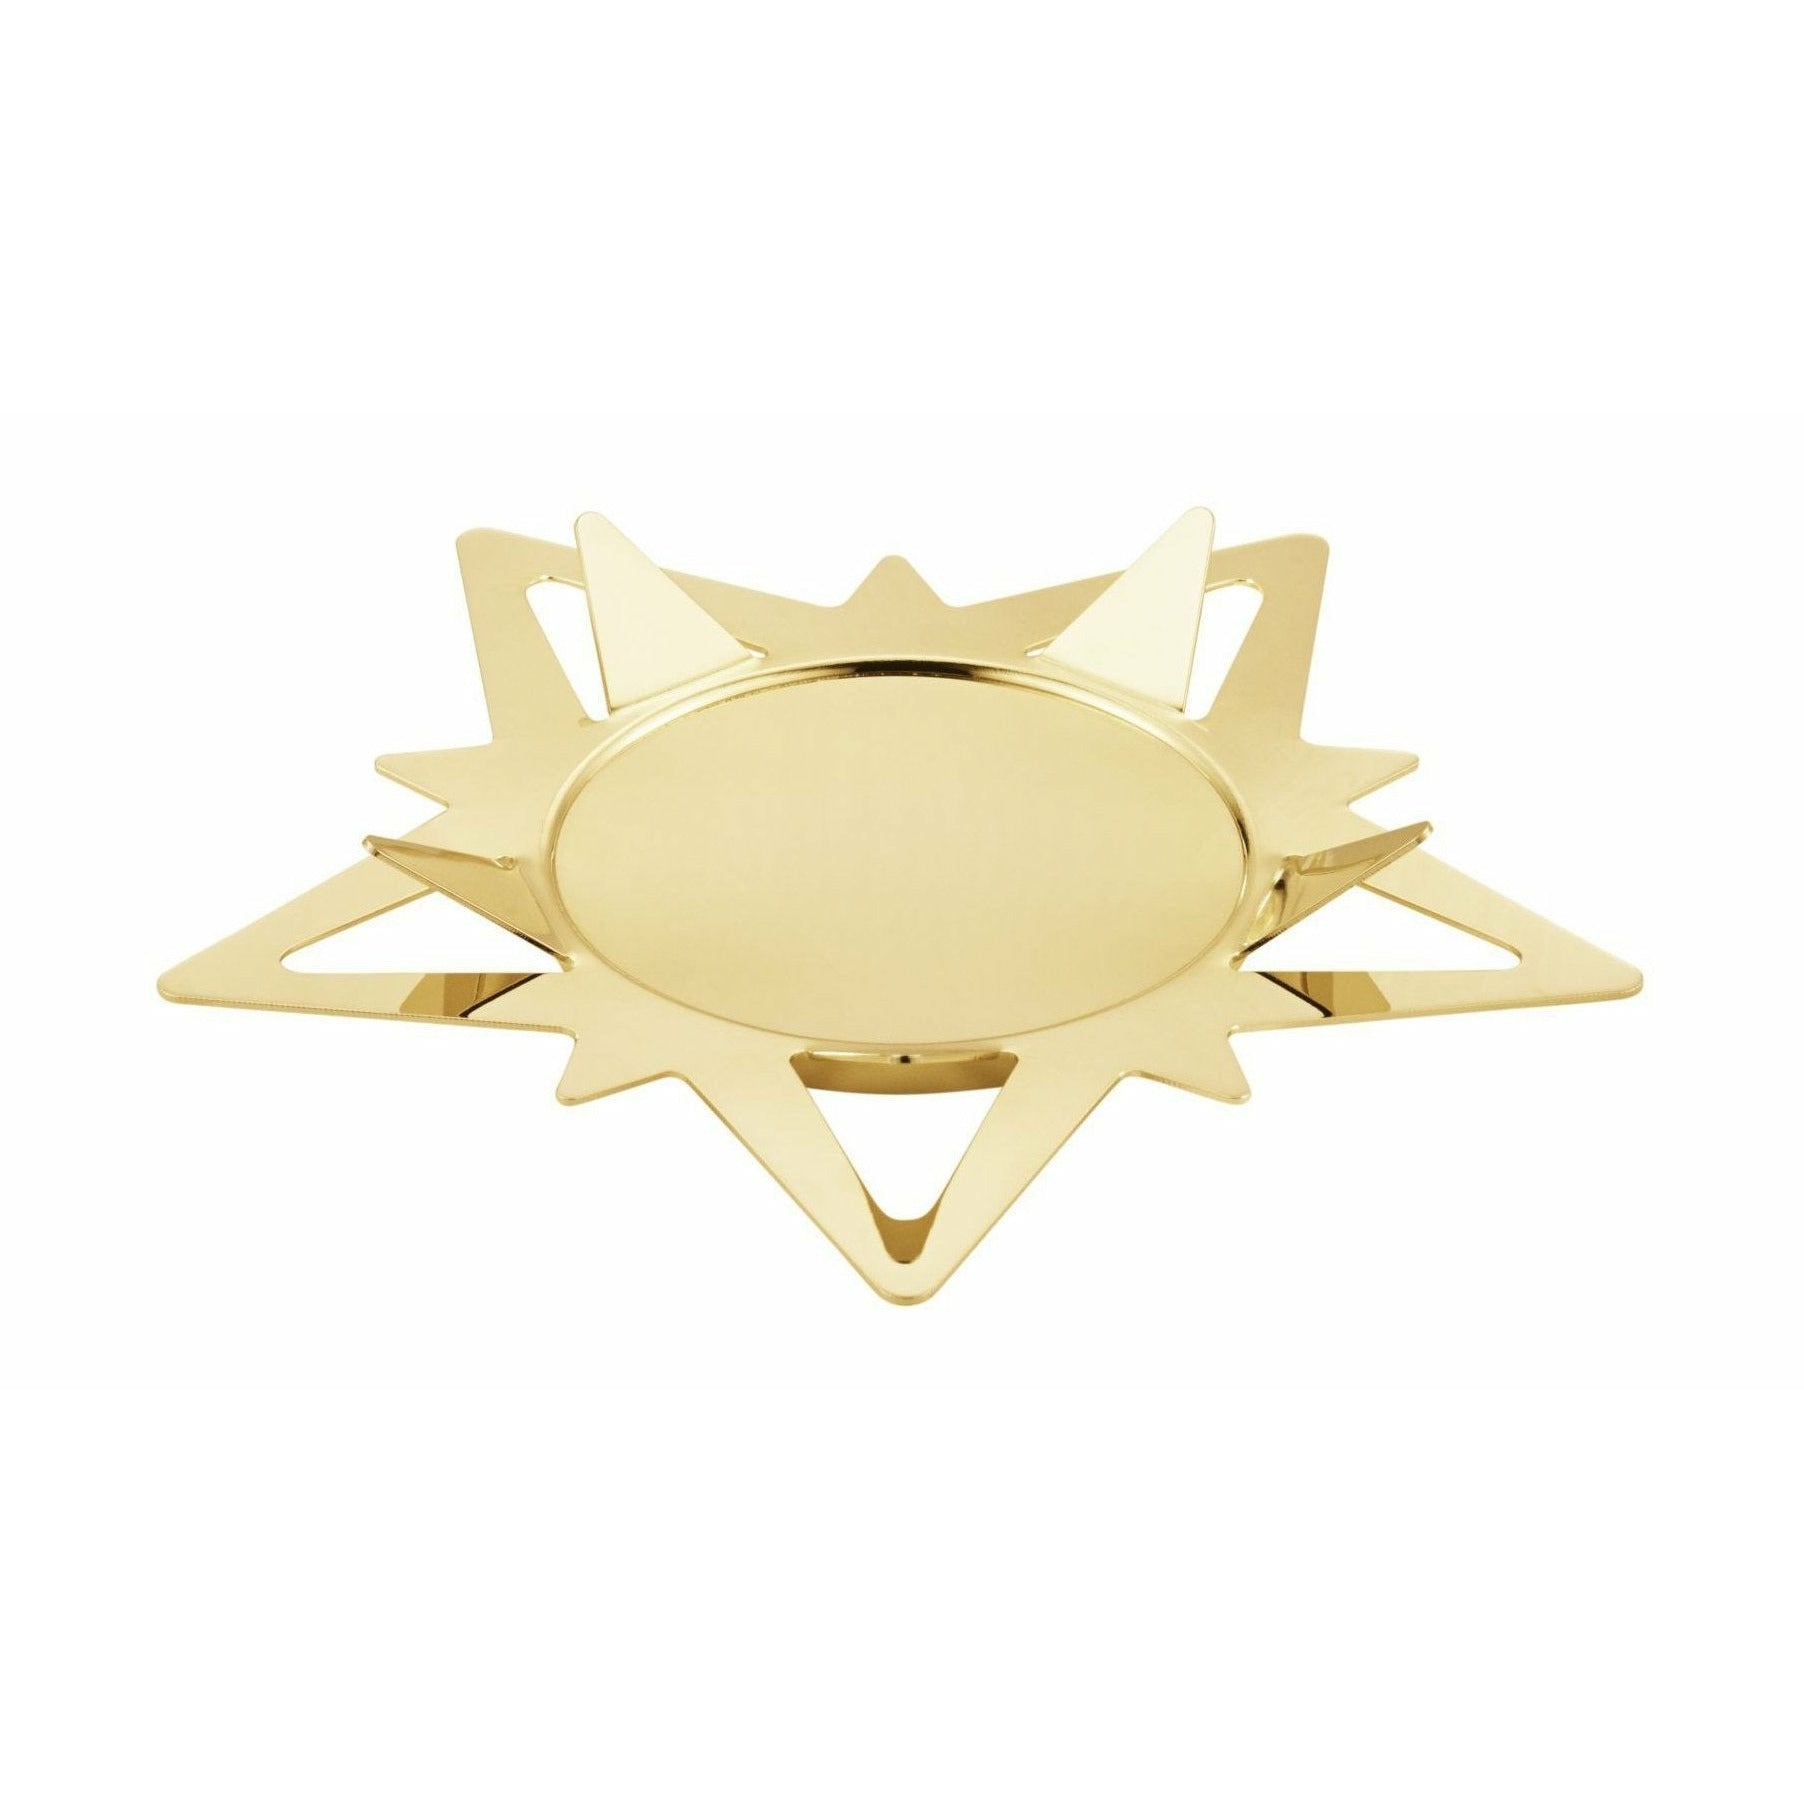 Georg Jensen Classic Christmas Star Candle Holder For Block Candles, Gold Plated